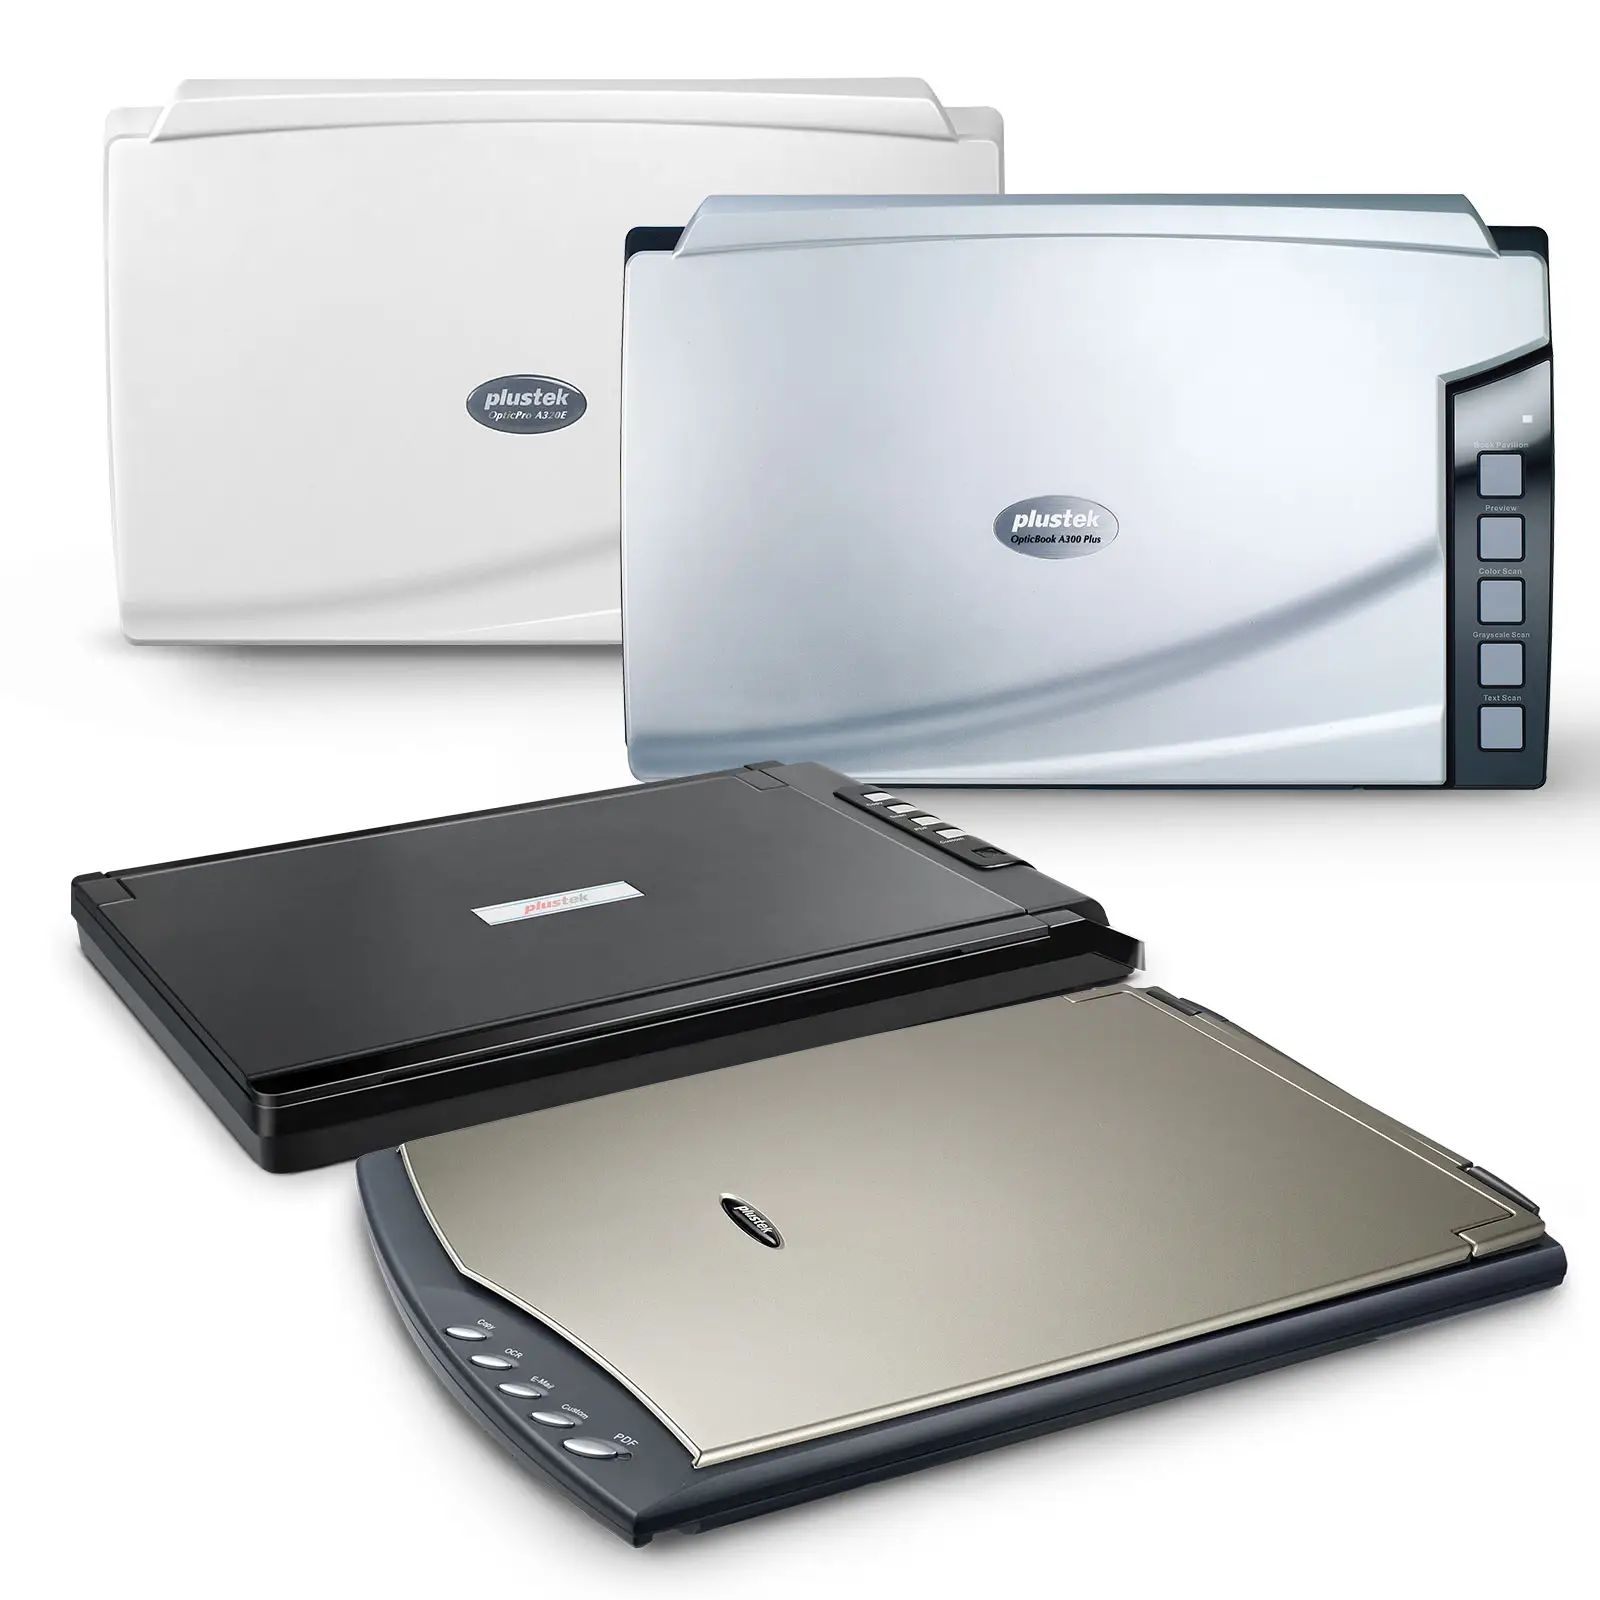 Plustek A3 A4 A5 Flatbed Scanner - large format scanner with high resolution   support customize